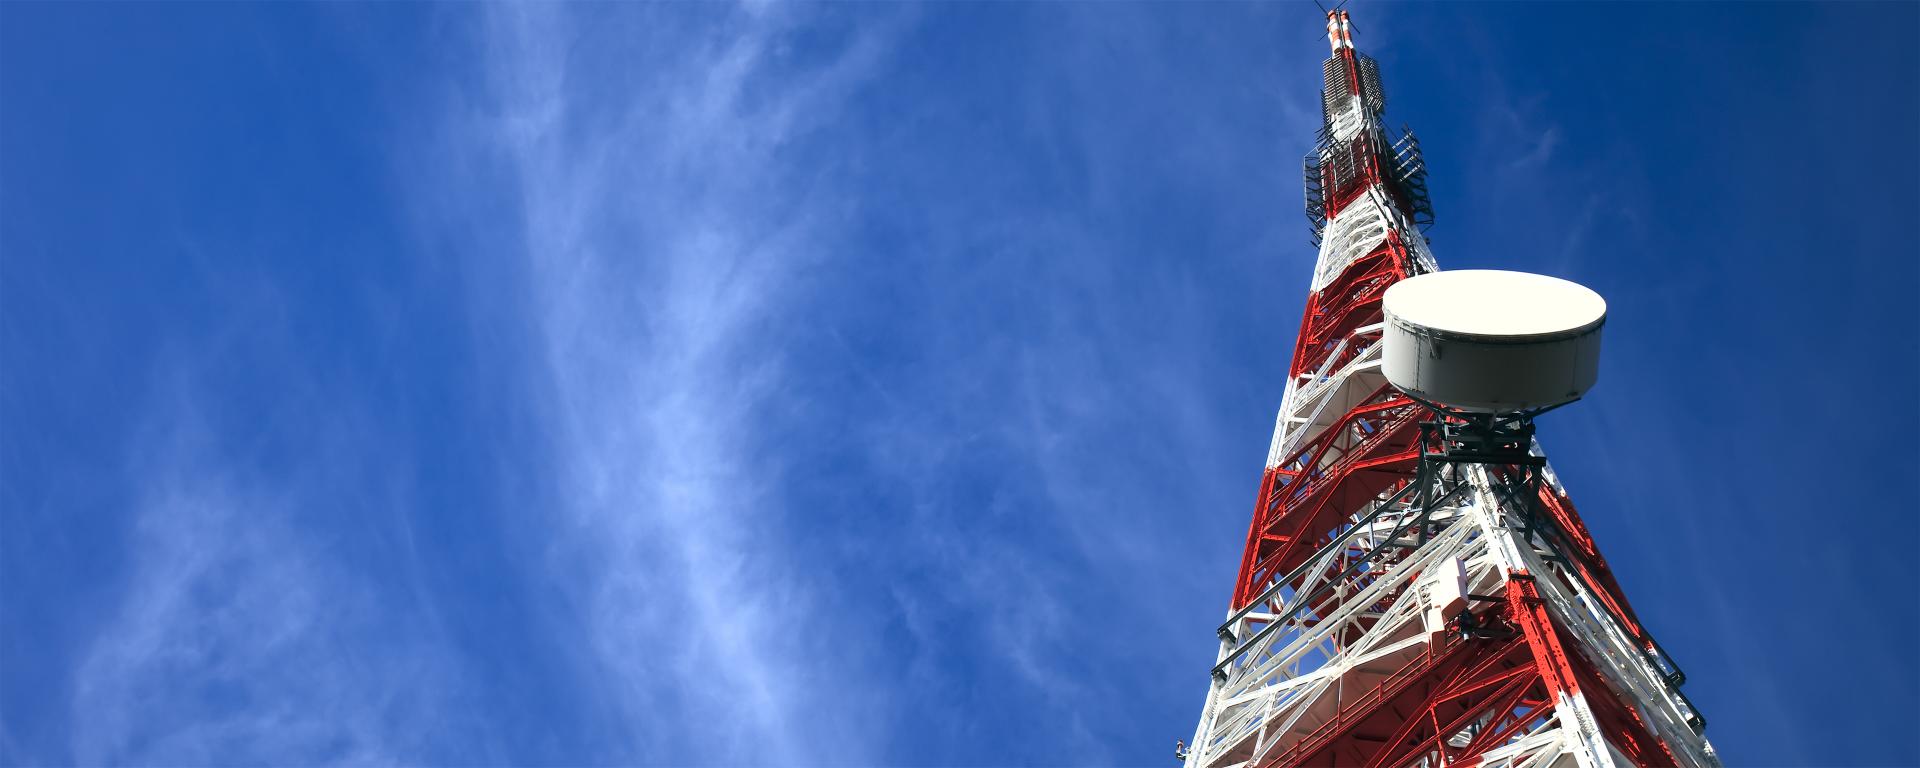 Red and white telecommunications tower in a blue sky